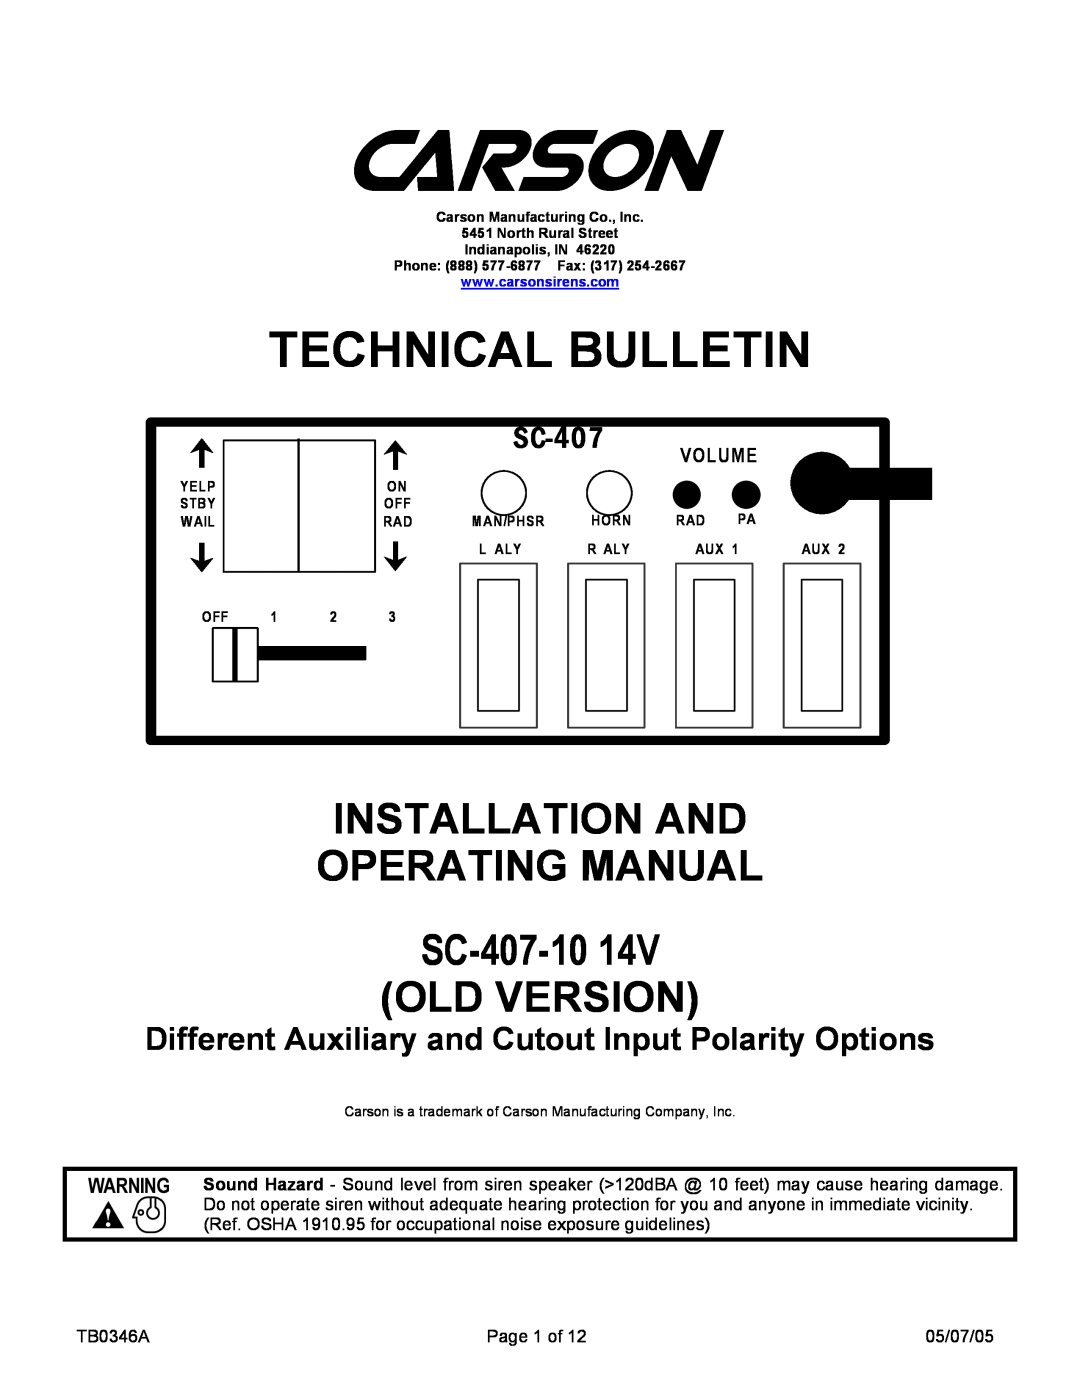 Carson SC-407 operating instructions Carson Manufacturing Co., Inc 5451 North Rural Street, Indianapolis, IN, Volume 